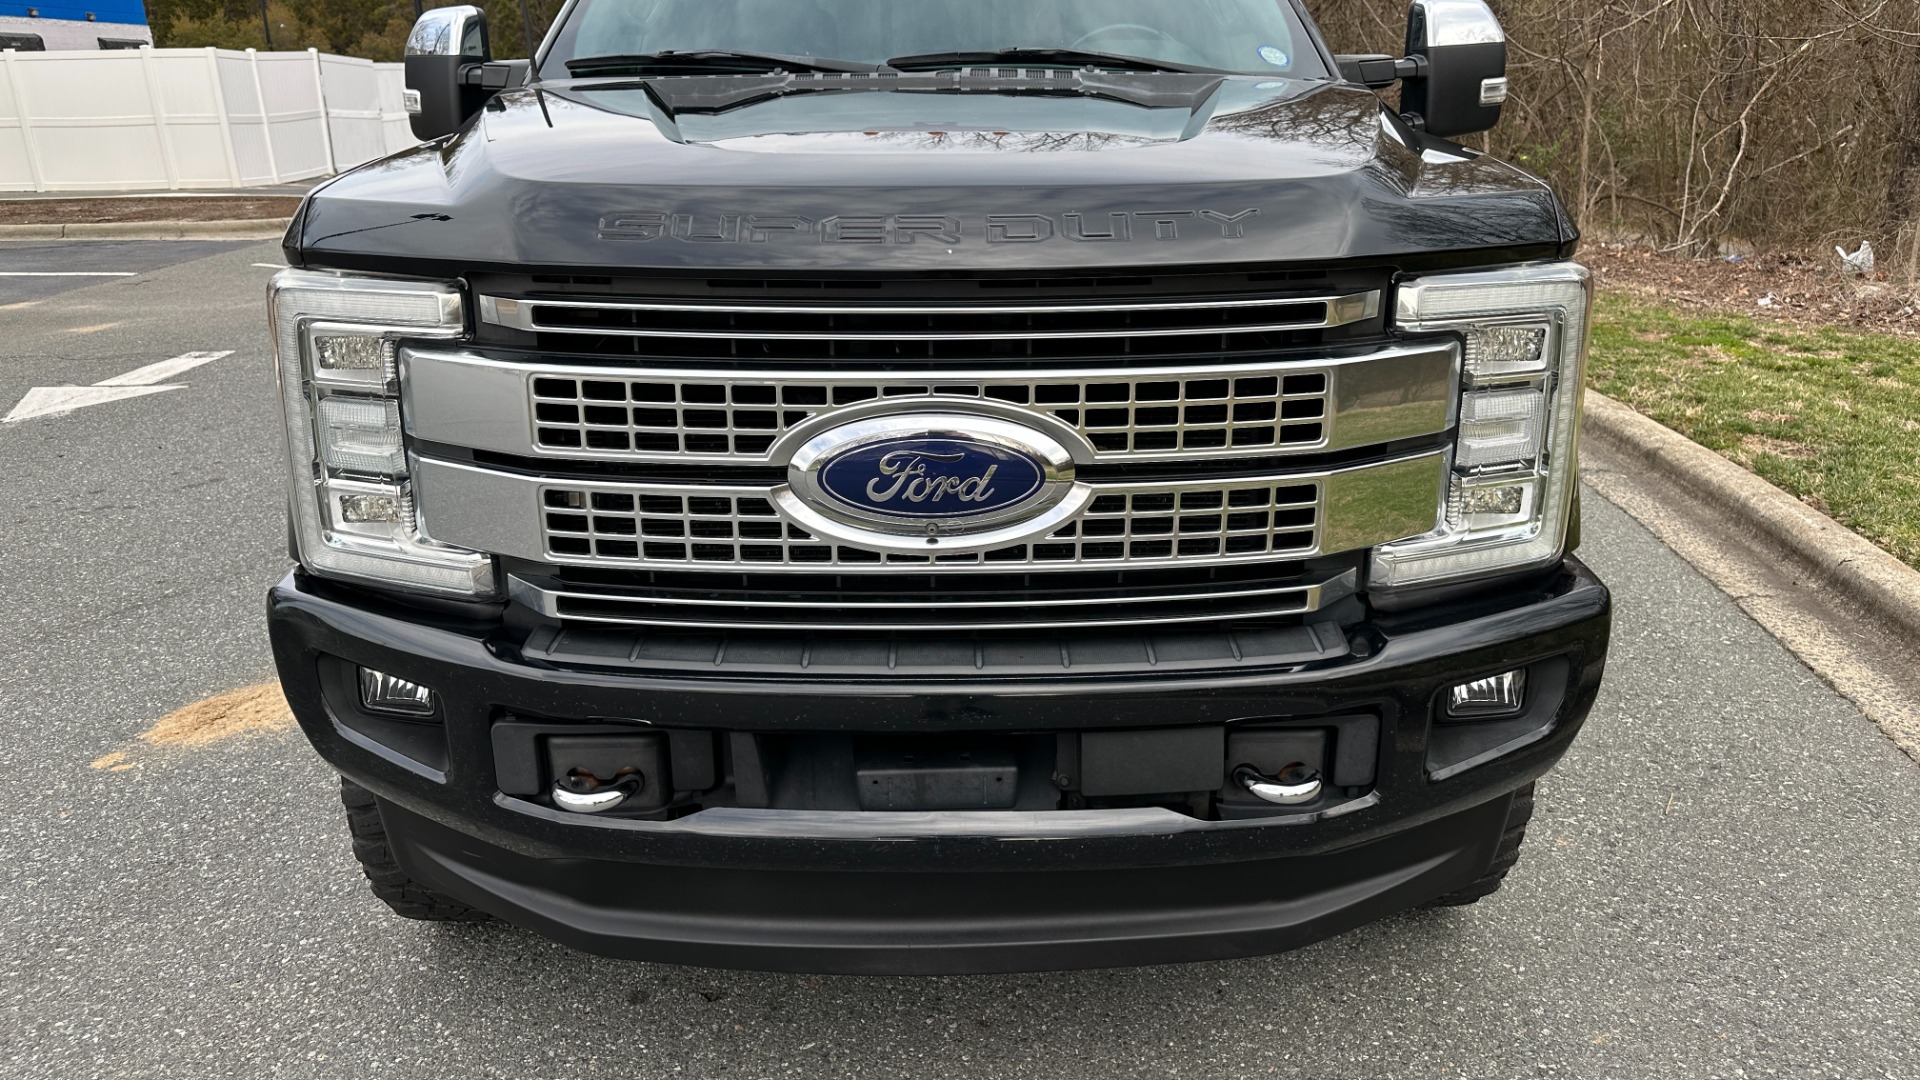 Used 2017 Ford Super Duty F-250 SRW PLATINUM / ULTIMATE PACKAGE / FX4 OFFROAD / 6.7L POWERSTROKE DIESEL for sale Sold at Formula Imports in Charlotte NC 28227 8